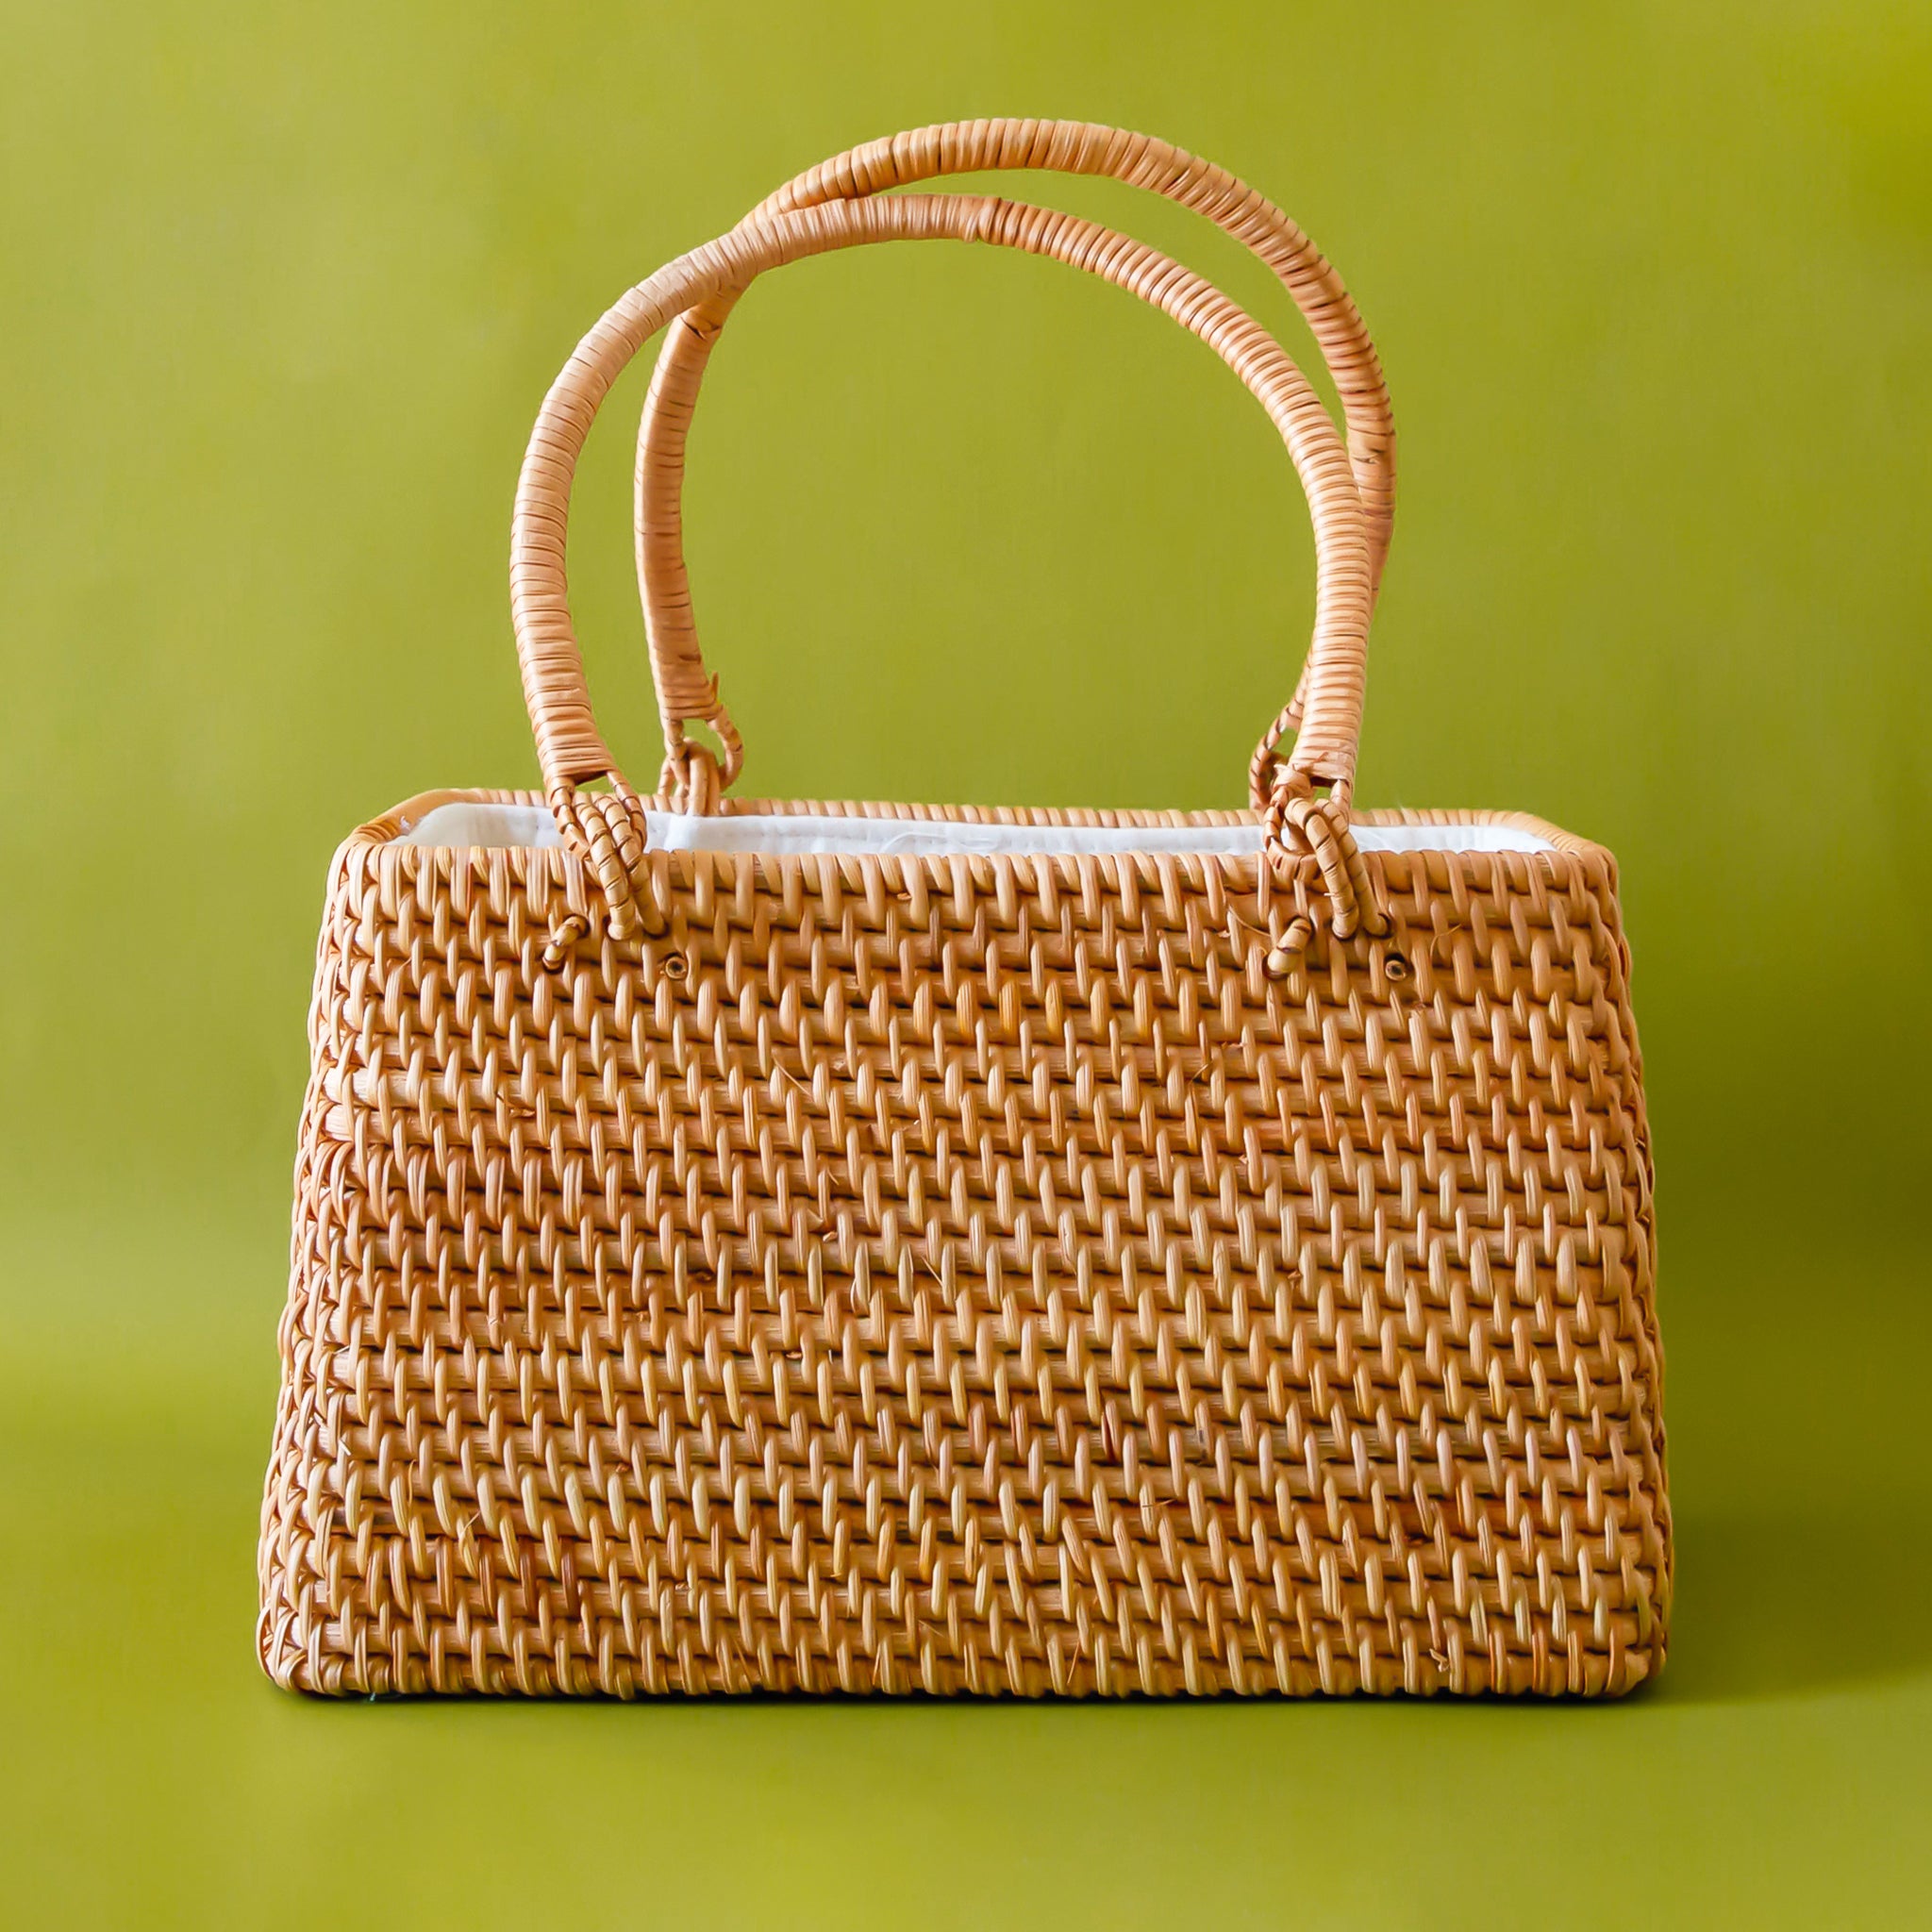 On a green background is a rattan handbag with two handles and a white lined interior. 